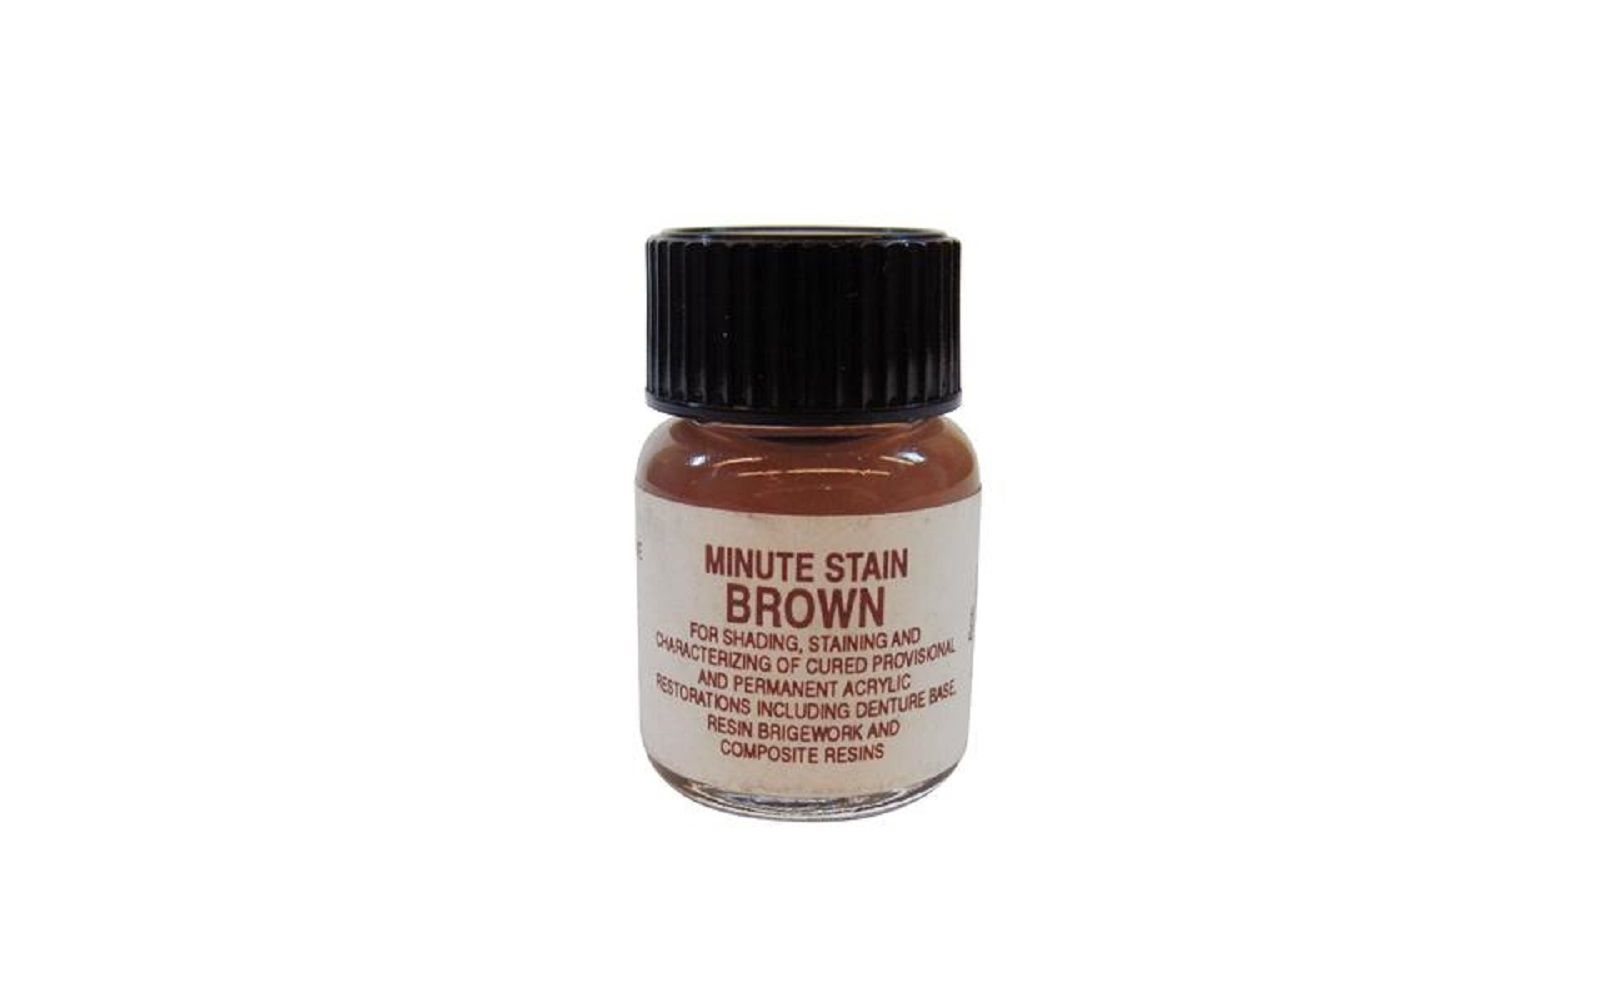 Minute stain colors, 1/4 oz refills - taub